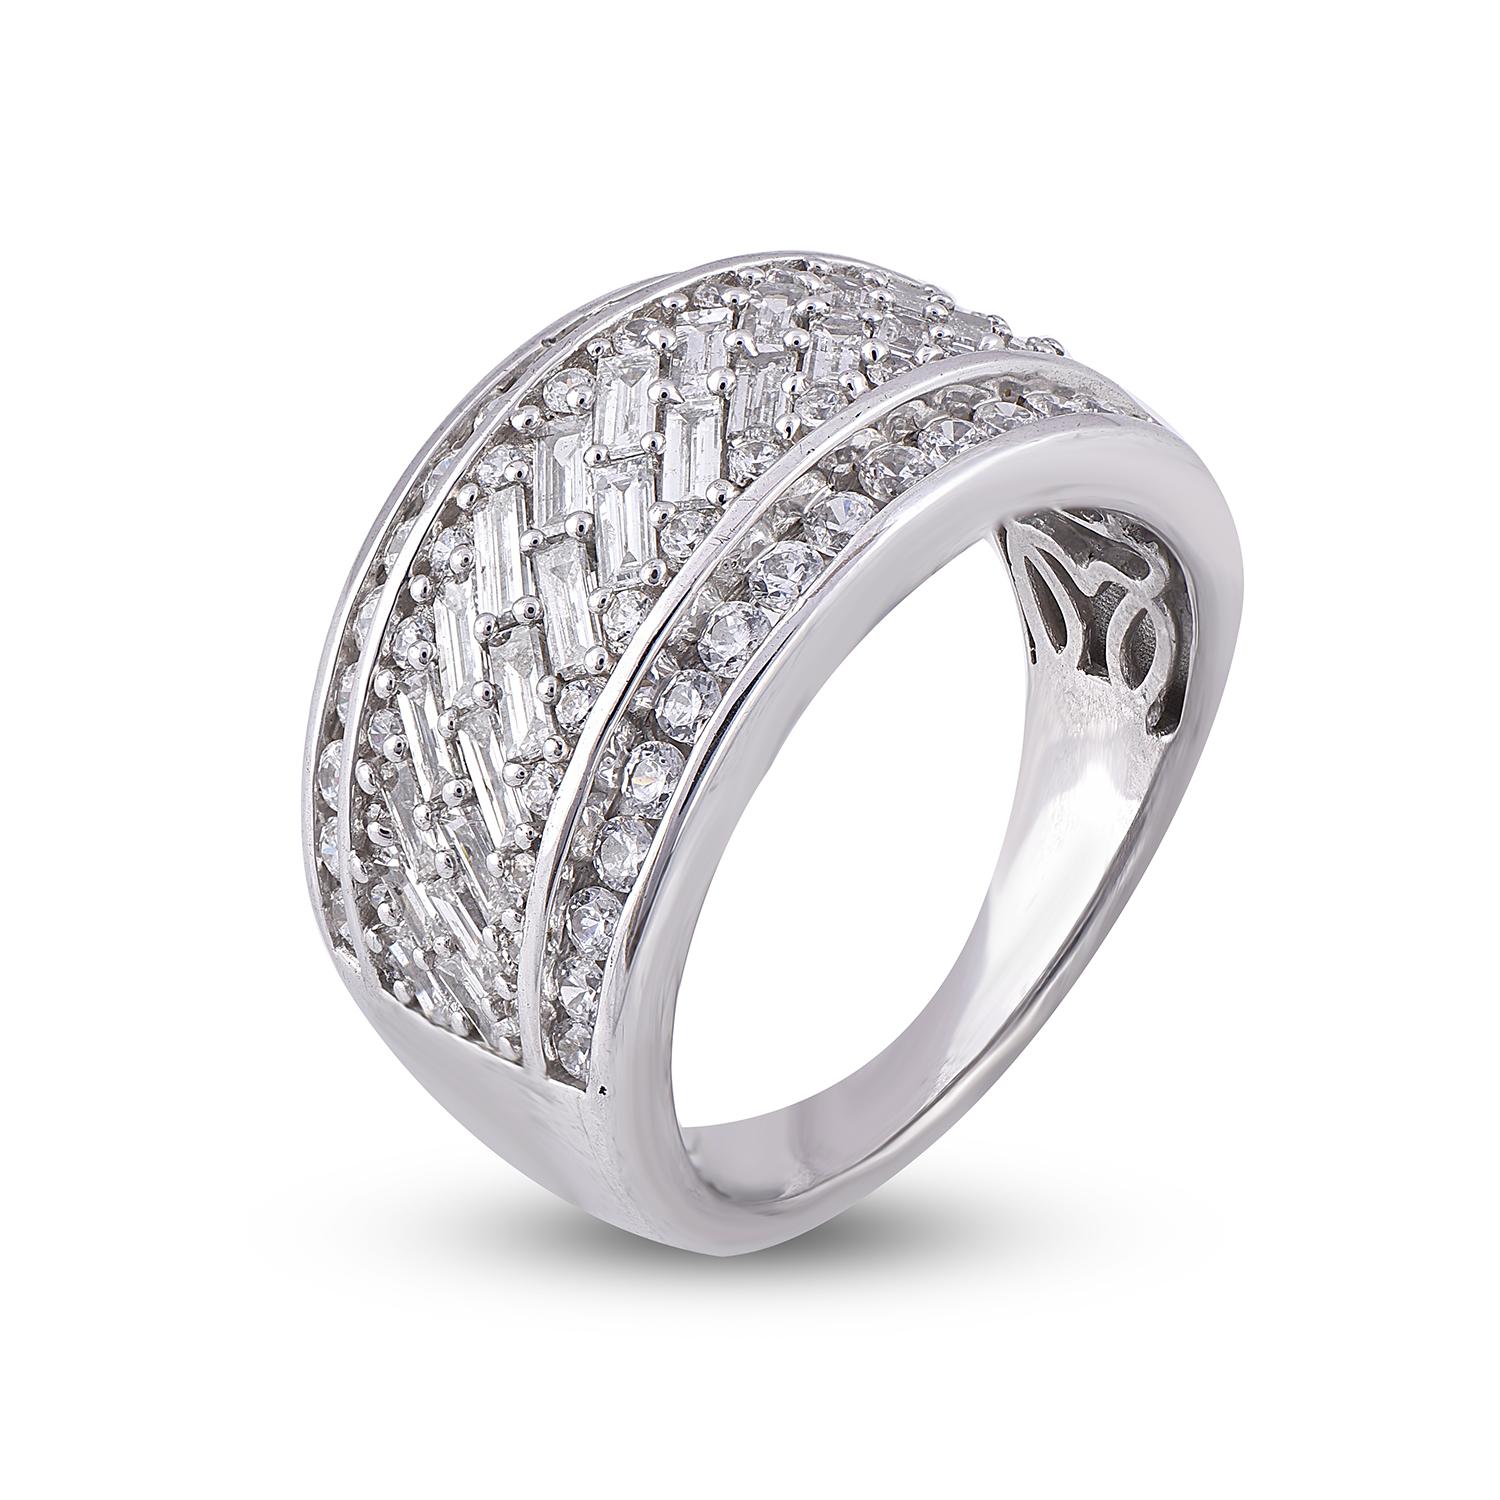 Designed with romance in mind, this diamond wide wedding band increses the sparkle factor. The ring is crafted from 14-karat gold in your choice of white, rose, or yellow, and features Round Brilliant 54 and Baguette - 28 white diamonds, Channelset,